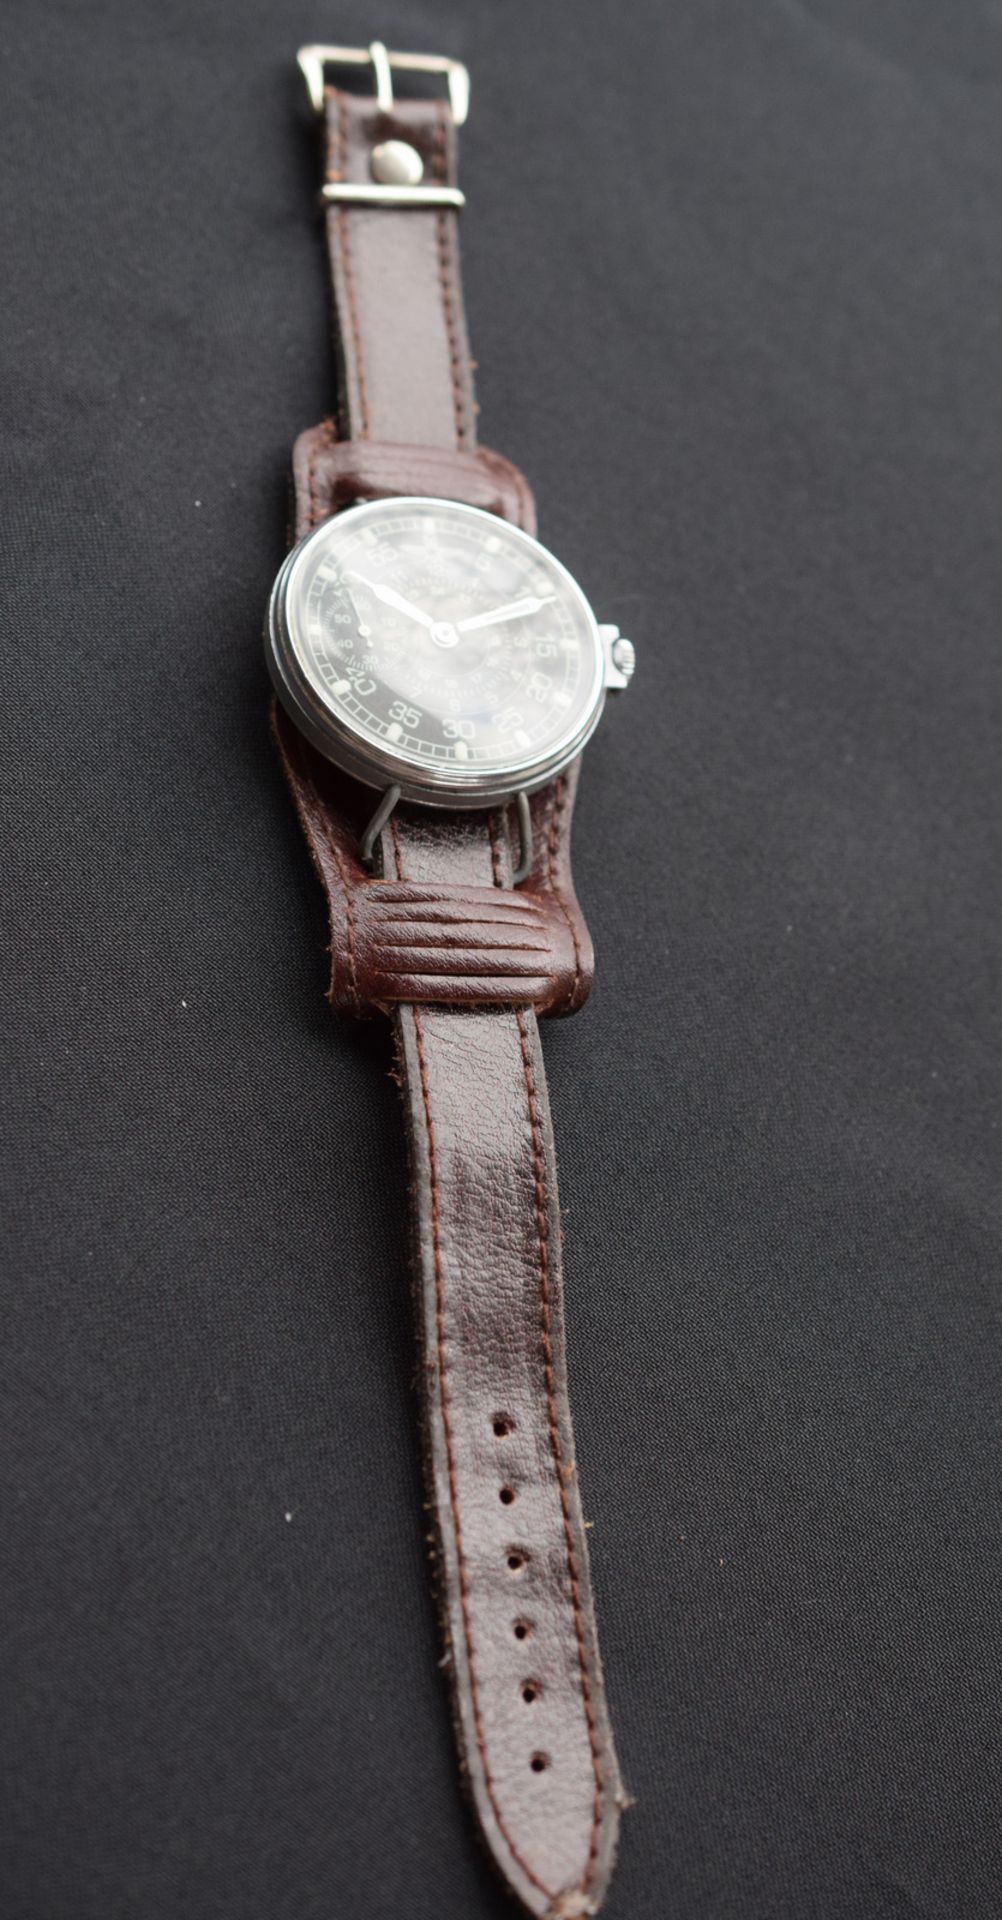 Russian Military Style Wristwatch On Bund Leather Strap - Image 3 of 10